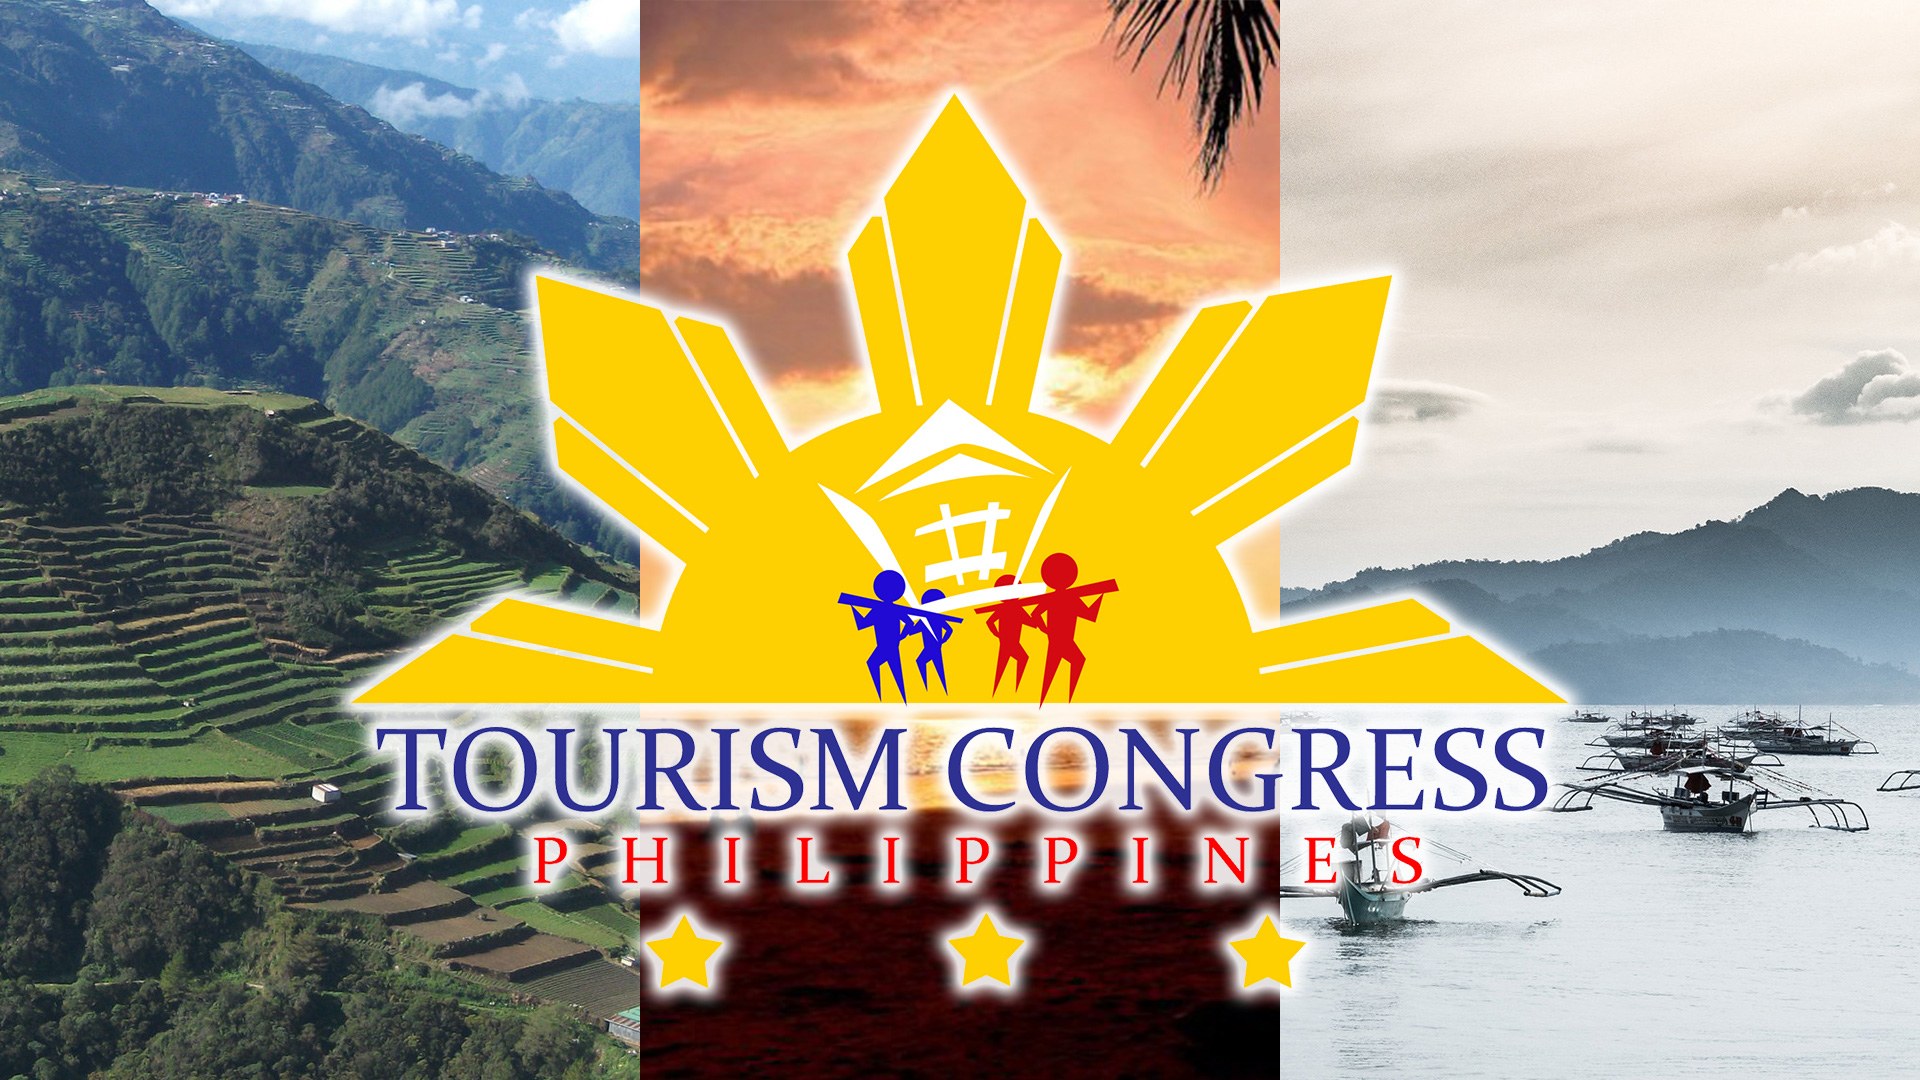 Collaborative efforts of the Department of Tourism and the Tourism Congress of Philippines amidst COVID-19 pandemic